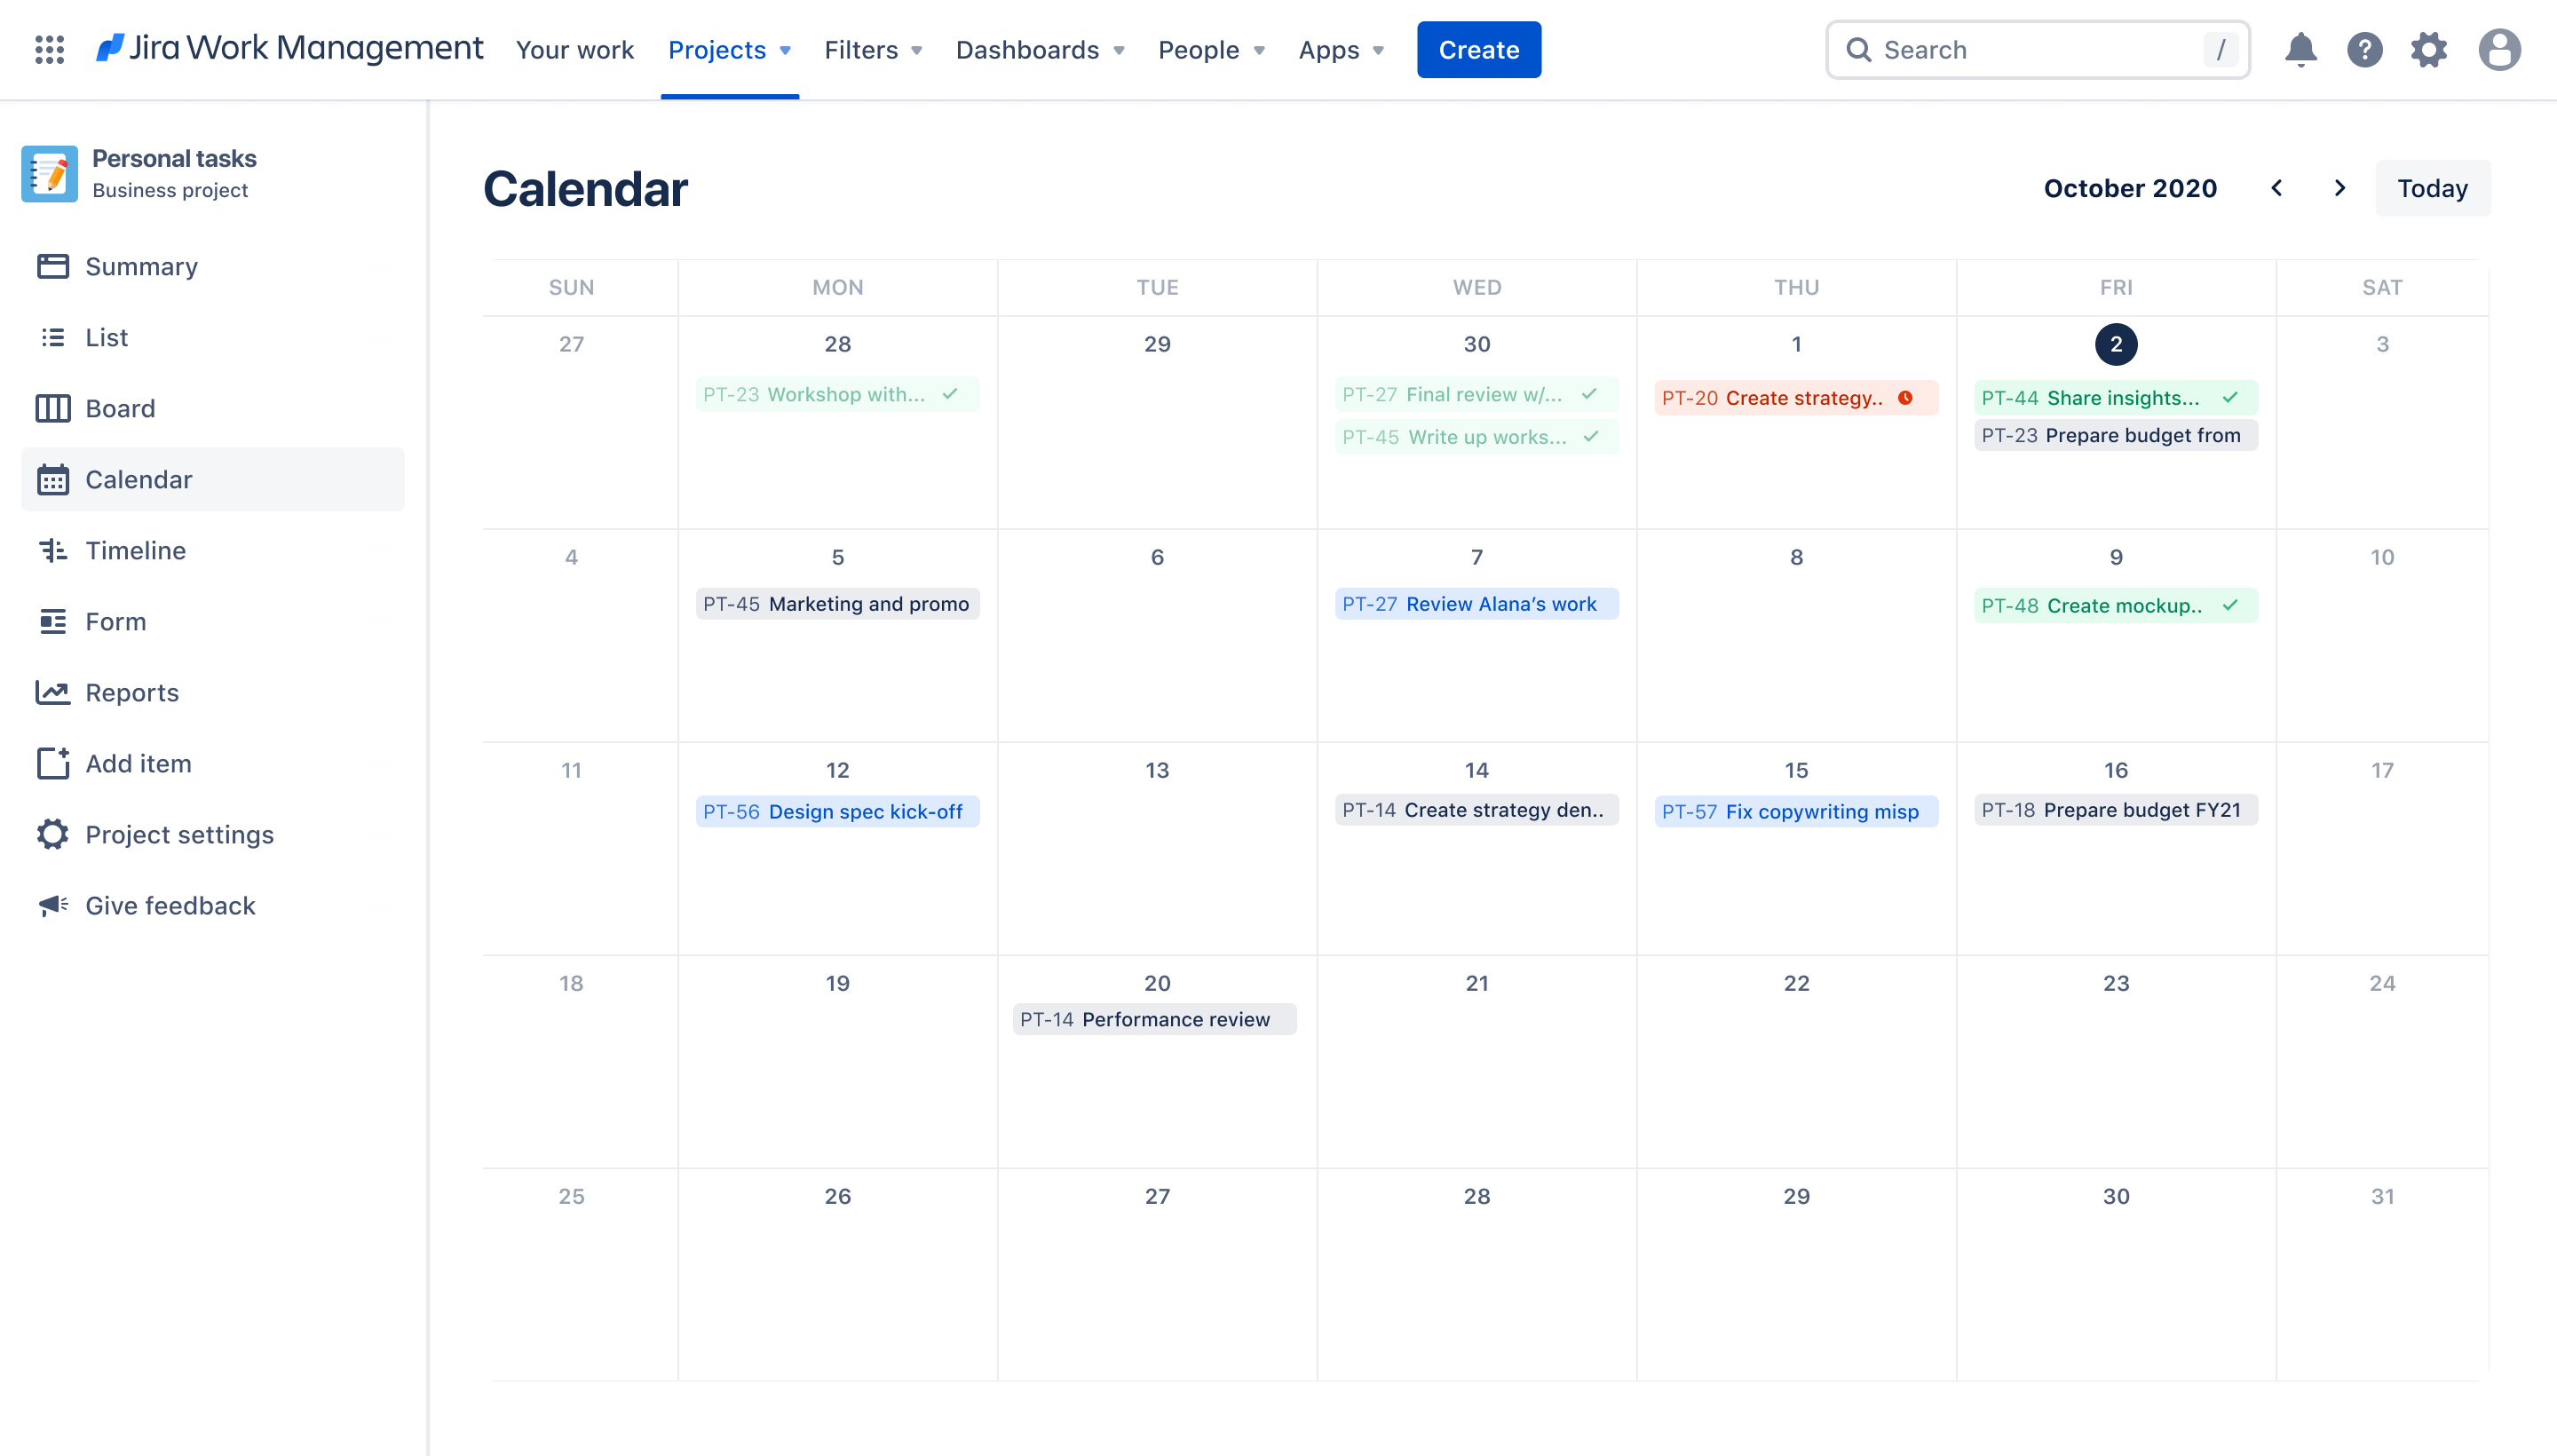 Calendar view of the personal task tracker template for Jira Work Management